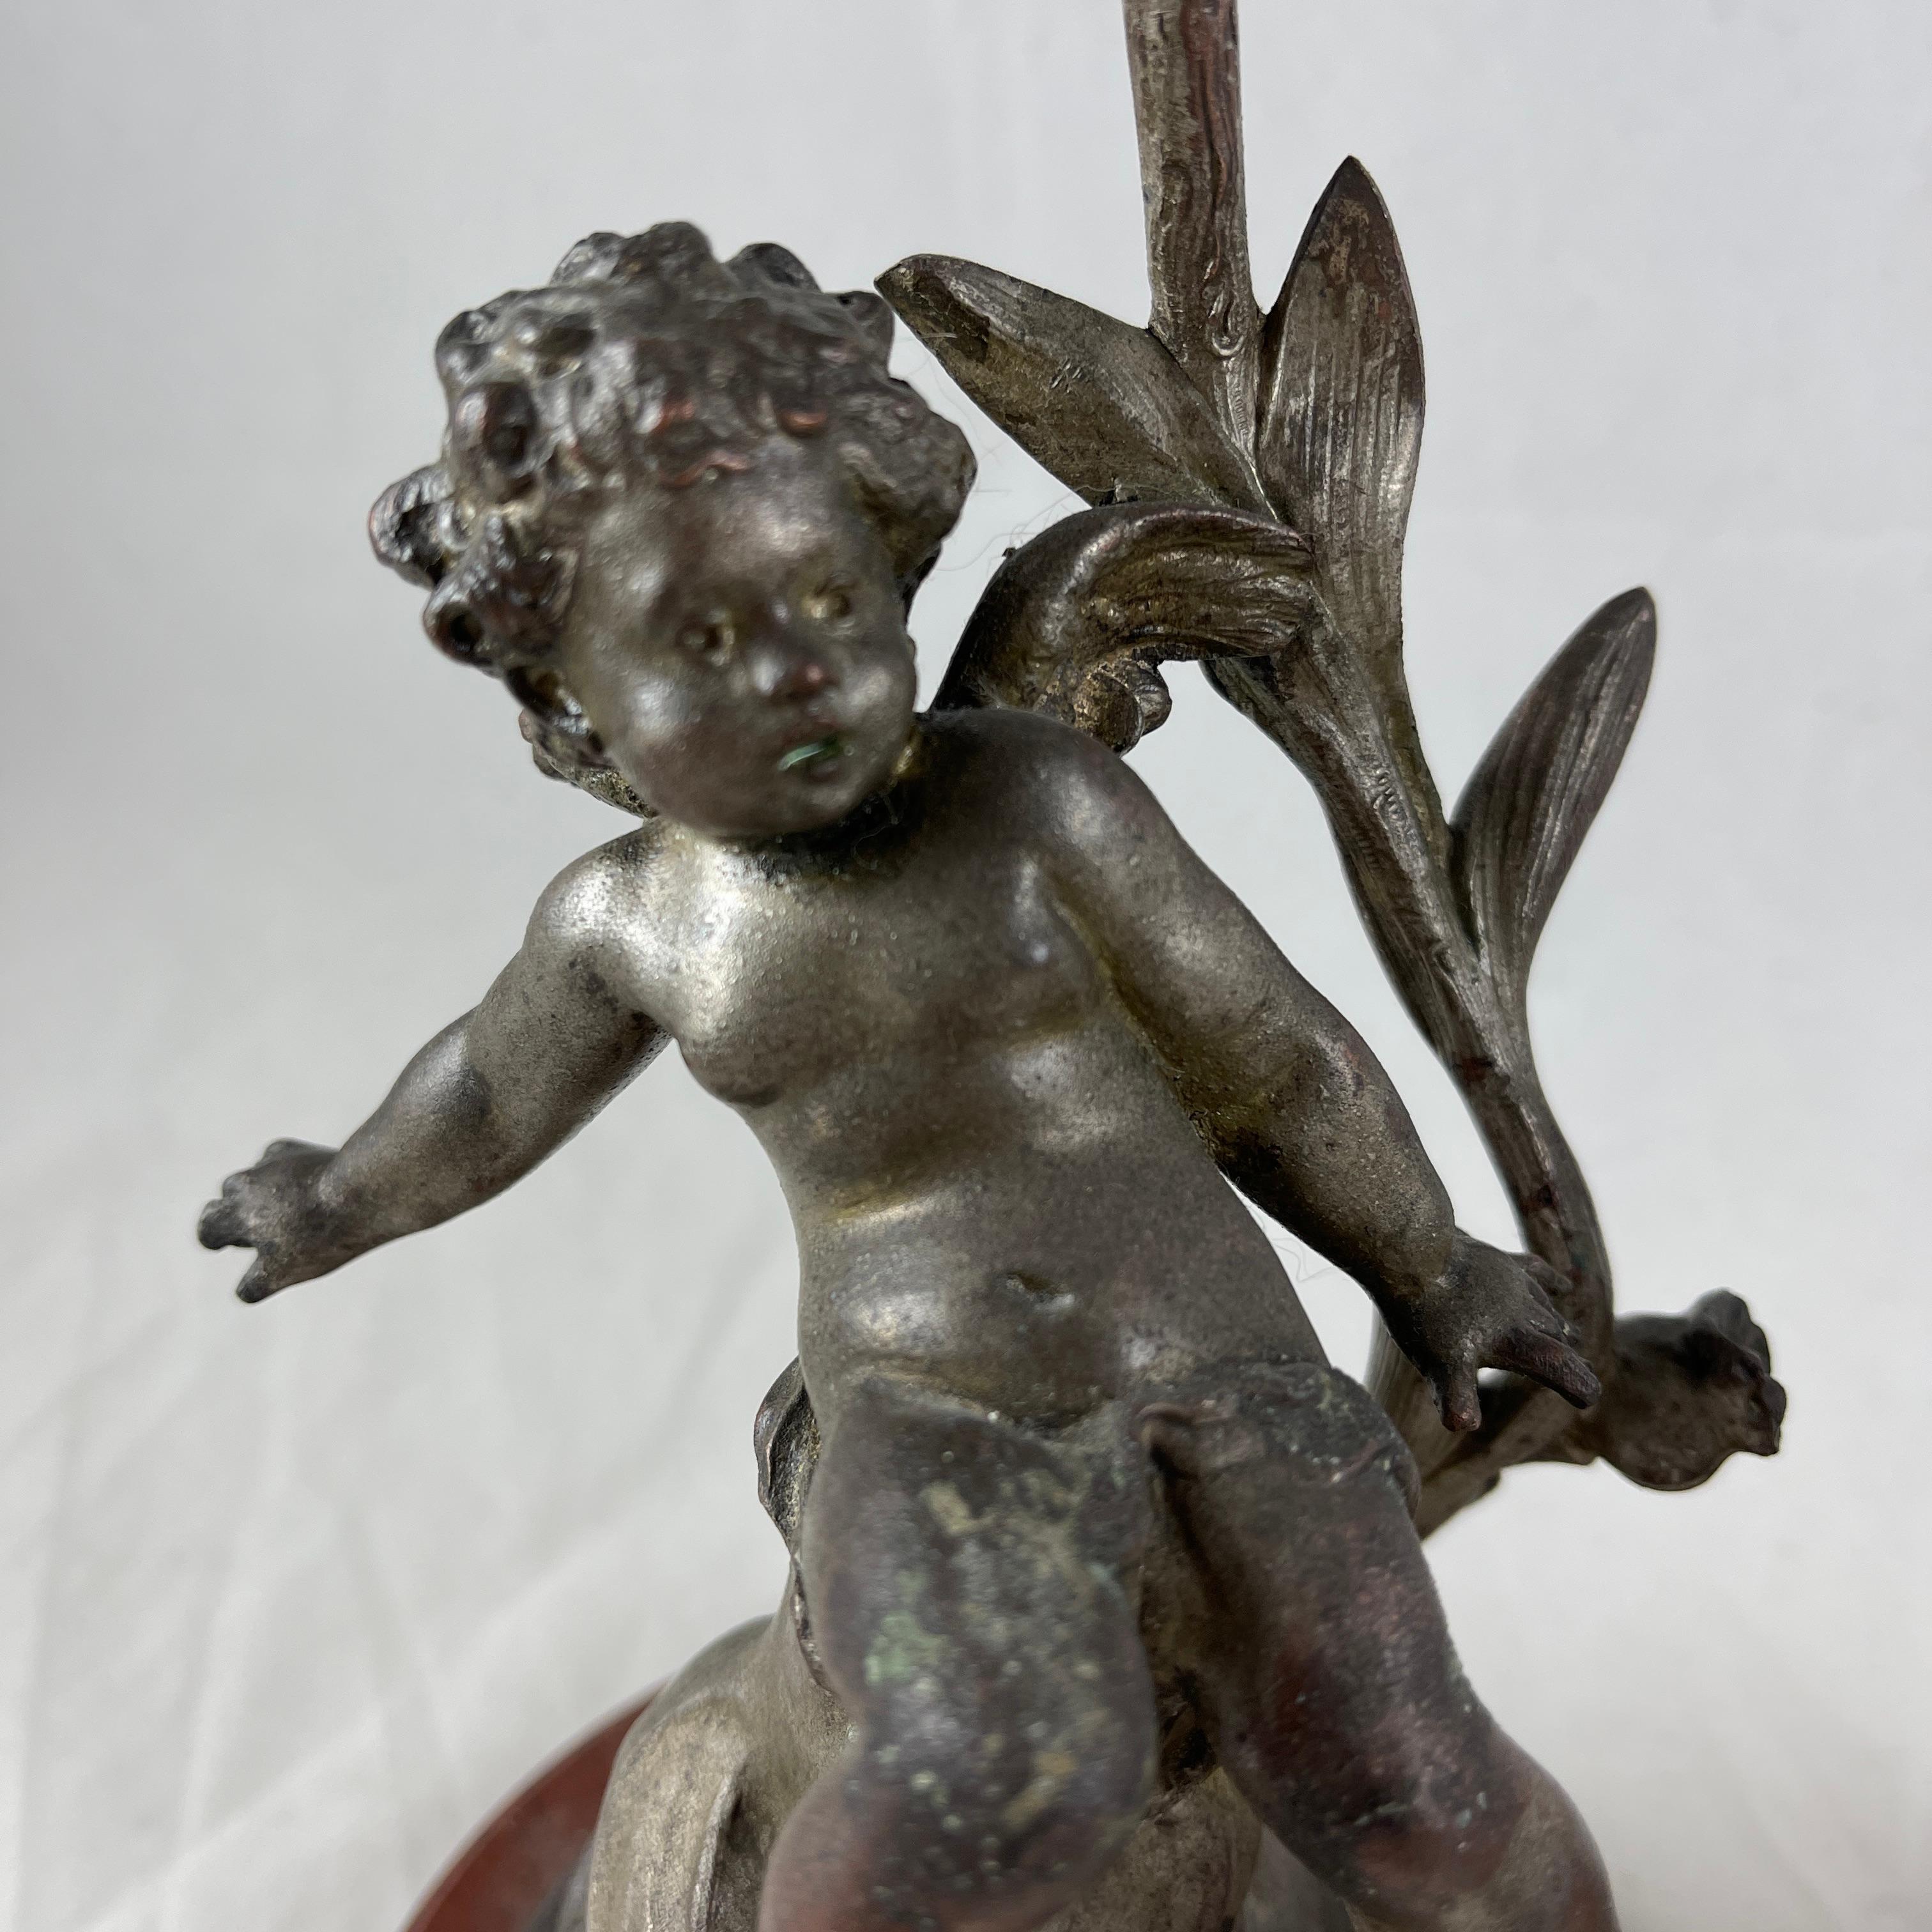 A charming and heavy pair of Putti candlesticks modeled and signed by the French sculptor Sylvain Kinsburger. The pair are modeled with great detail and a sense of fluid movement, circa late 19th century.

Showing two different putto or cherub